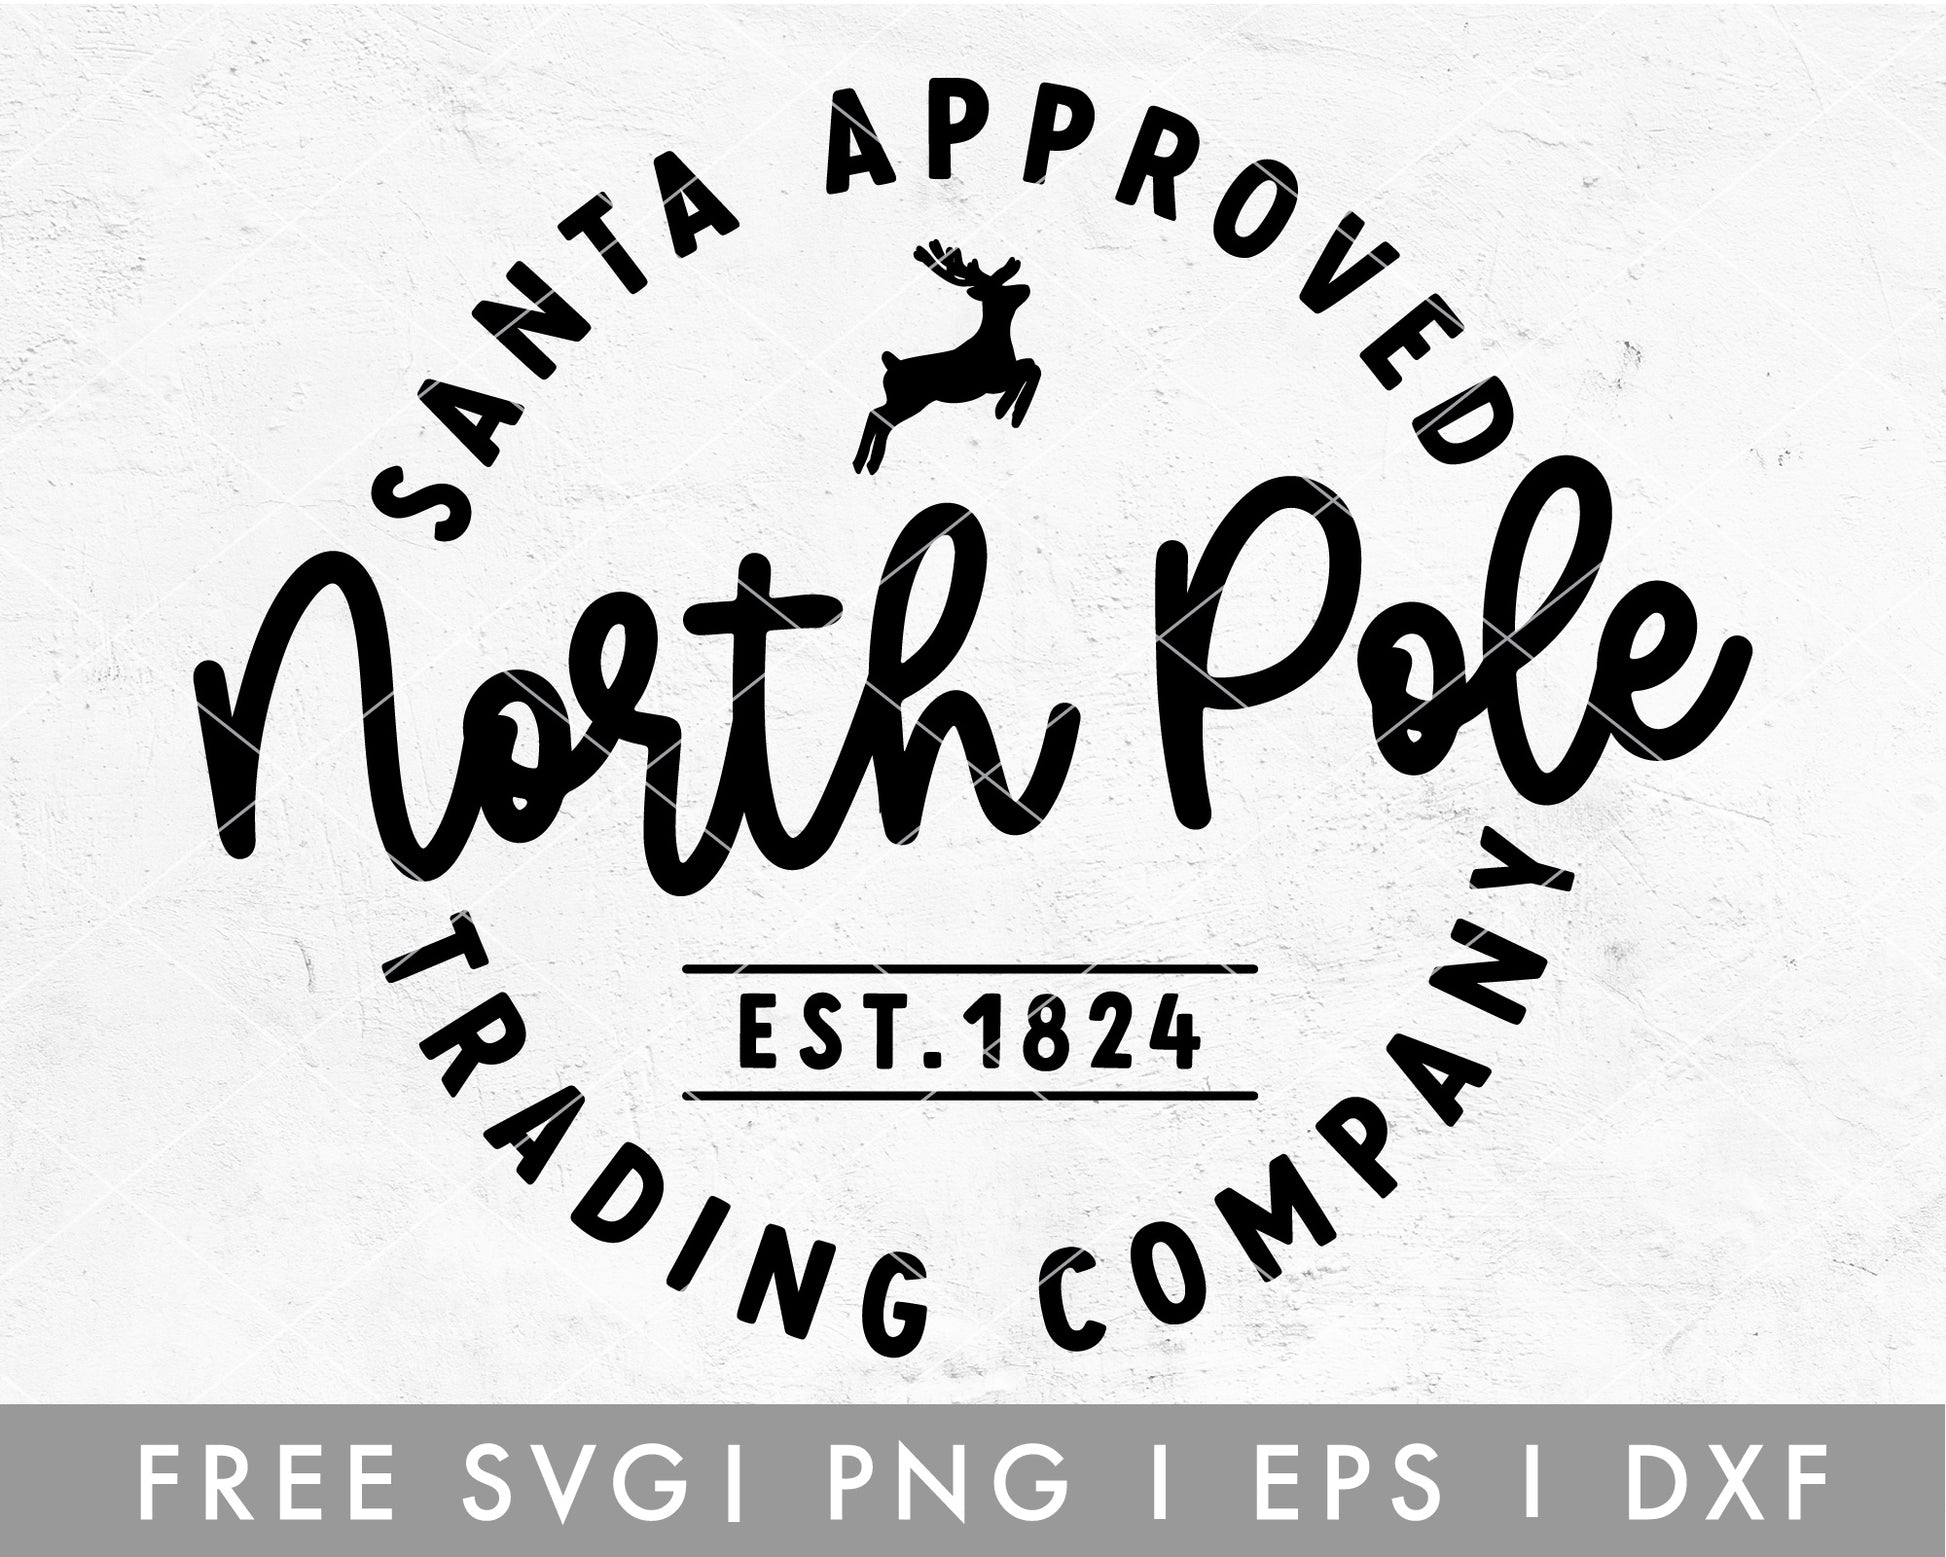 Free North Pole Trading Co SVG Cut File For Cricut, Cameo Silhouette | Free Christmas SVG Cutting File 